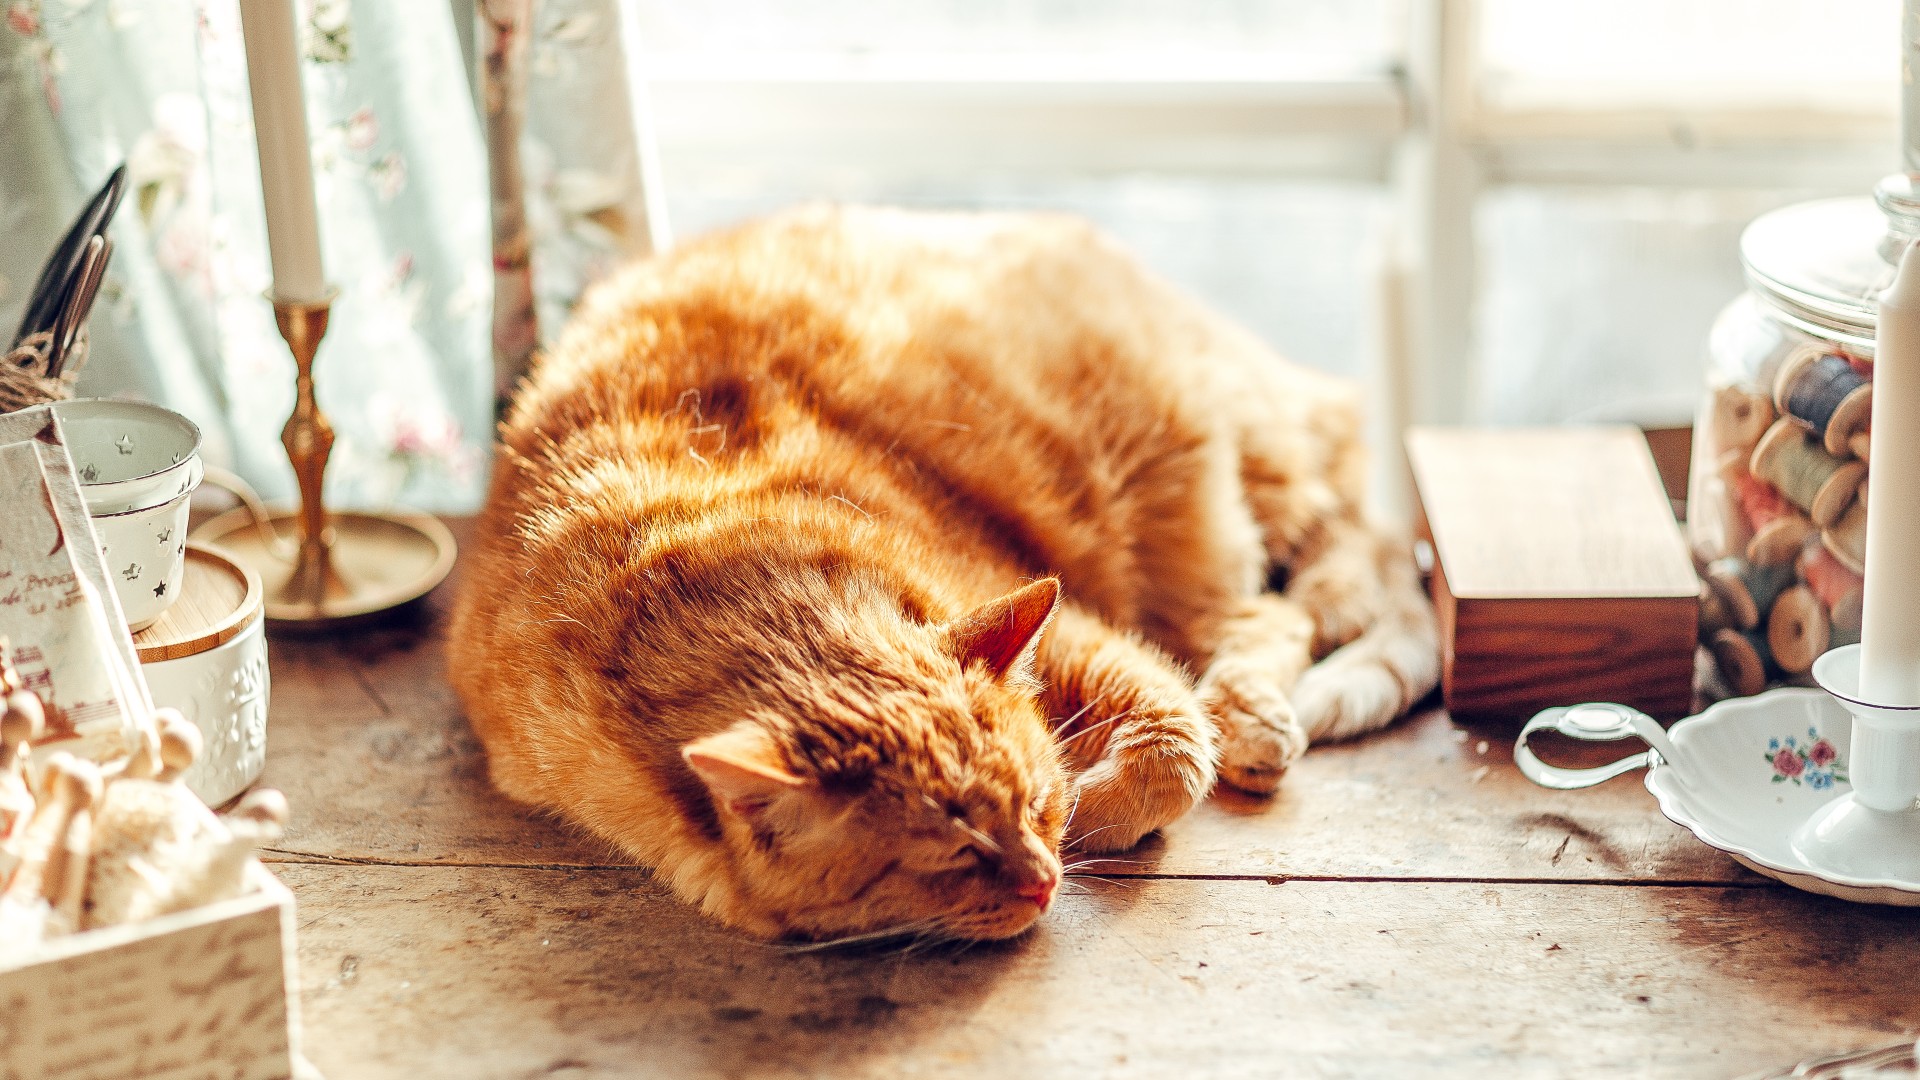 Ginger cat curled up fast asleep on table